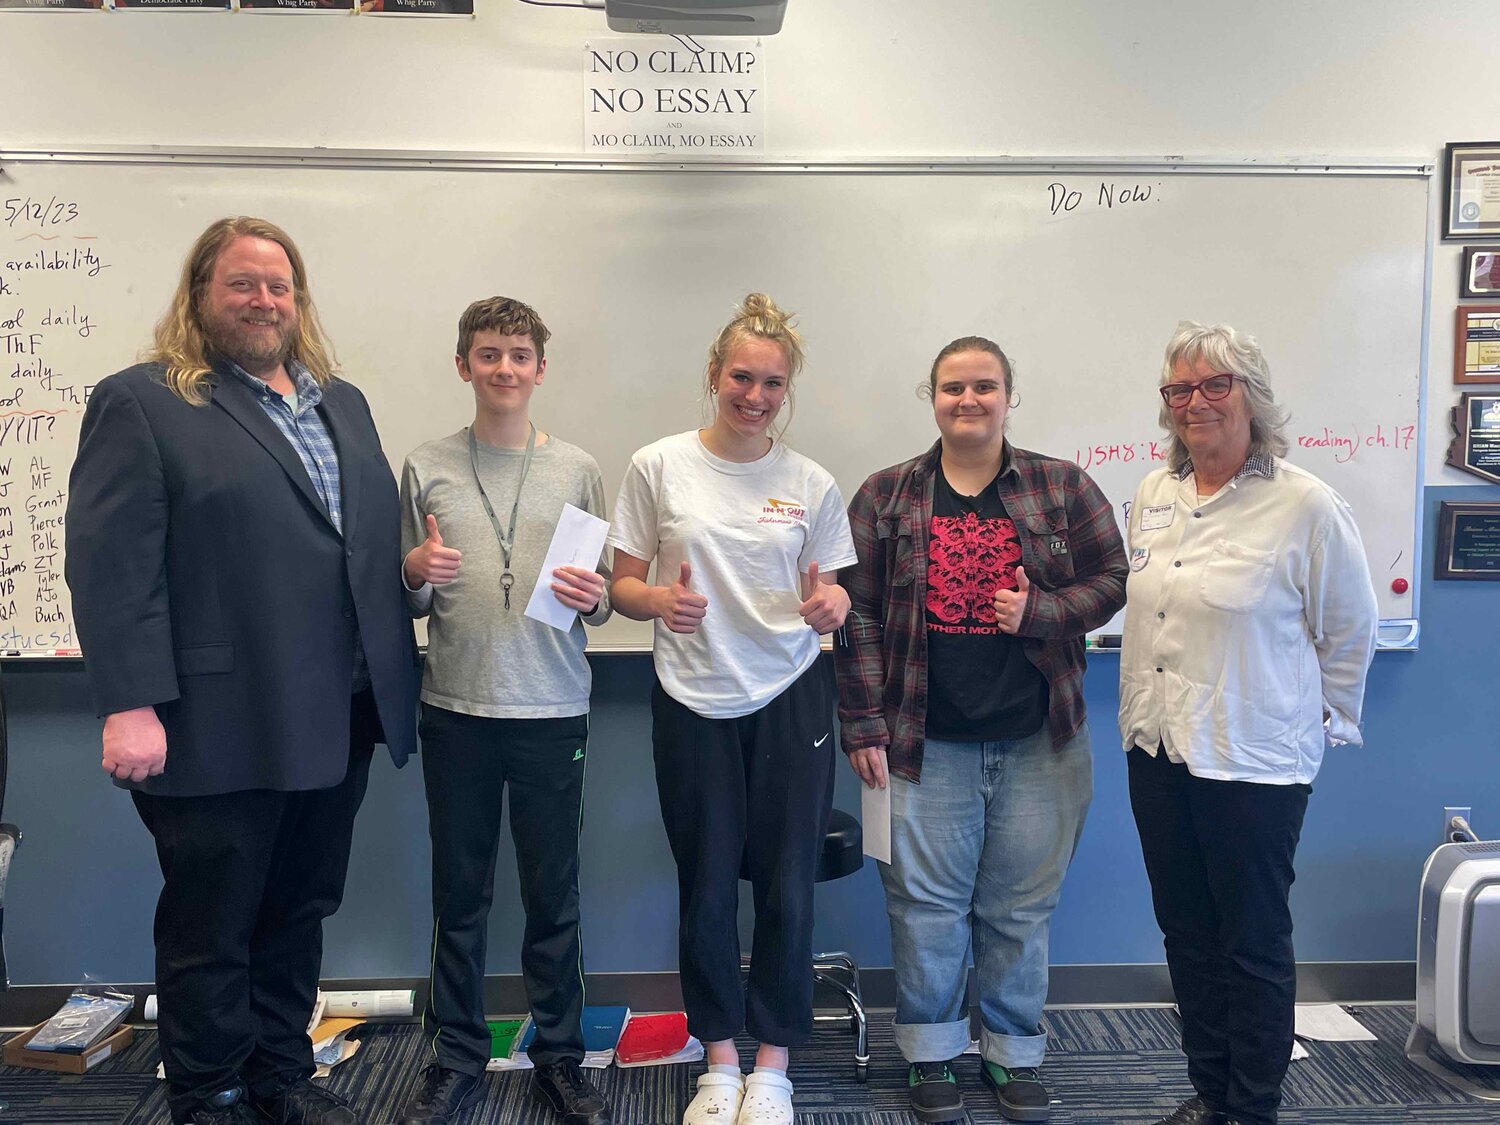 Brian MacKenzie, Chimacum High School teacher, stands with third-place essay winner Keanu Morrison, second-place winner Tessa Richardson, and first-place winner Elliot Pflueger. Also pictured is Jackie Aase, a League of Women Voters-Jefferson County member and Essay Team organizer.